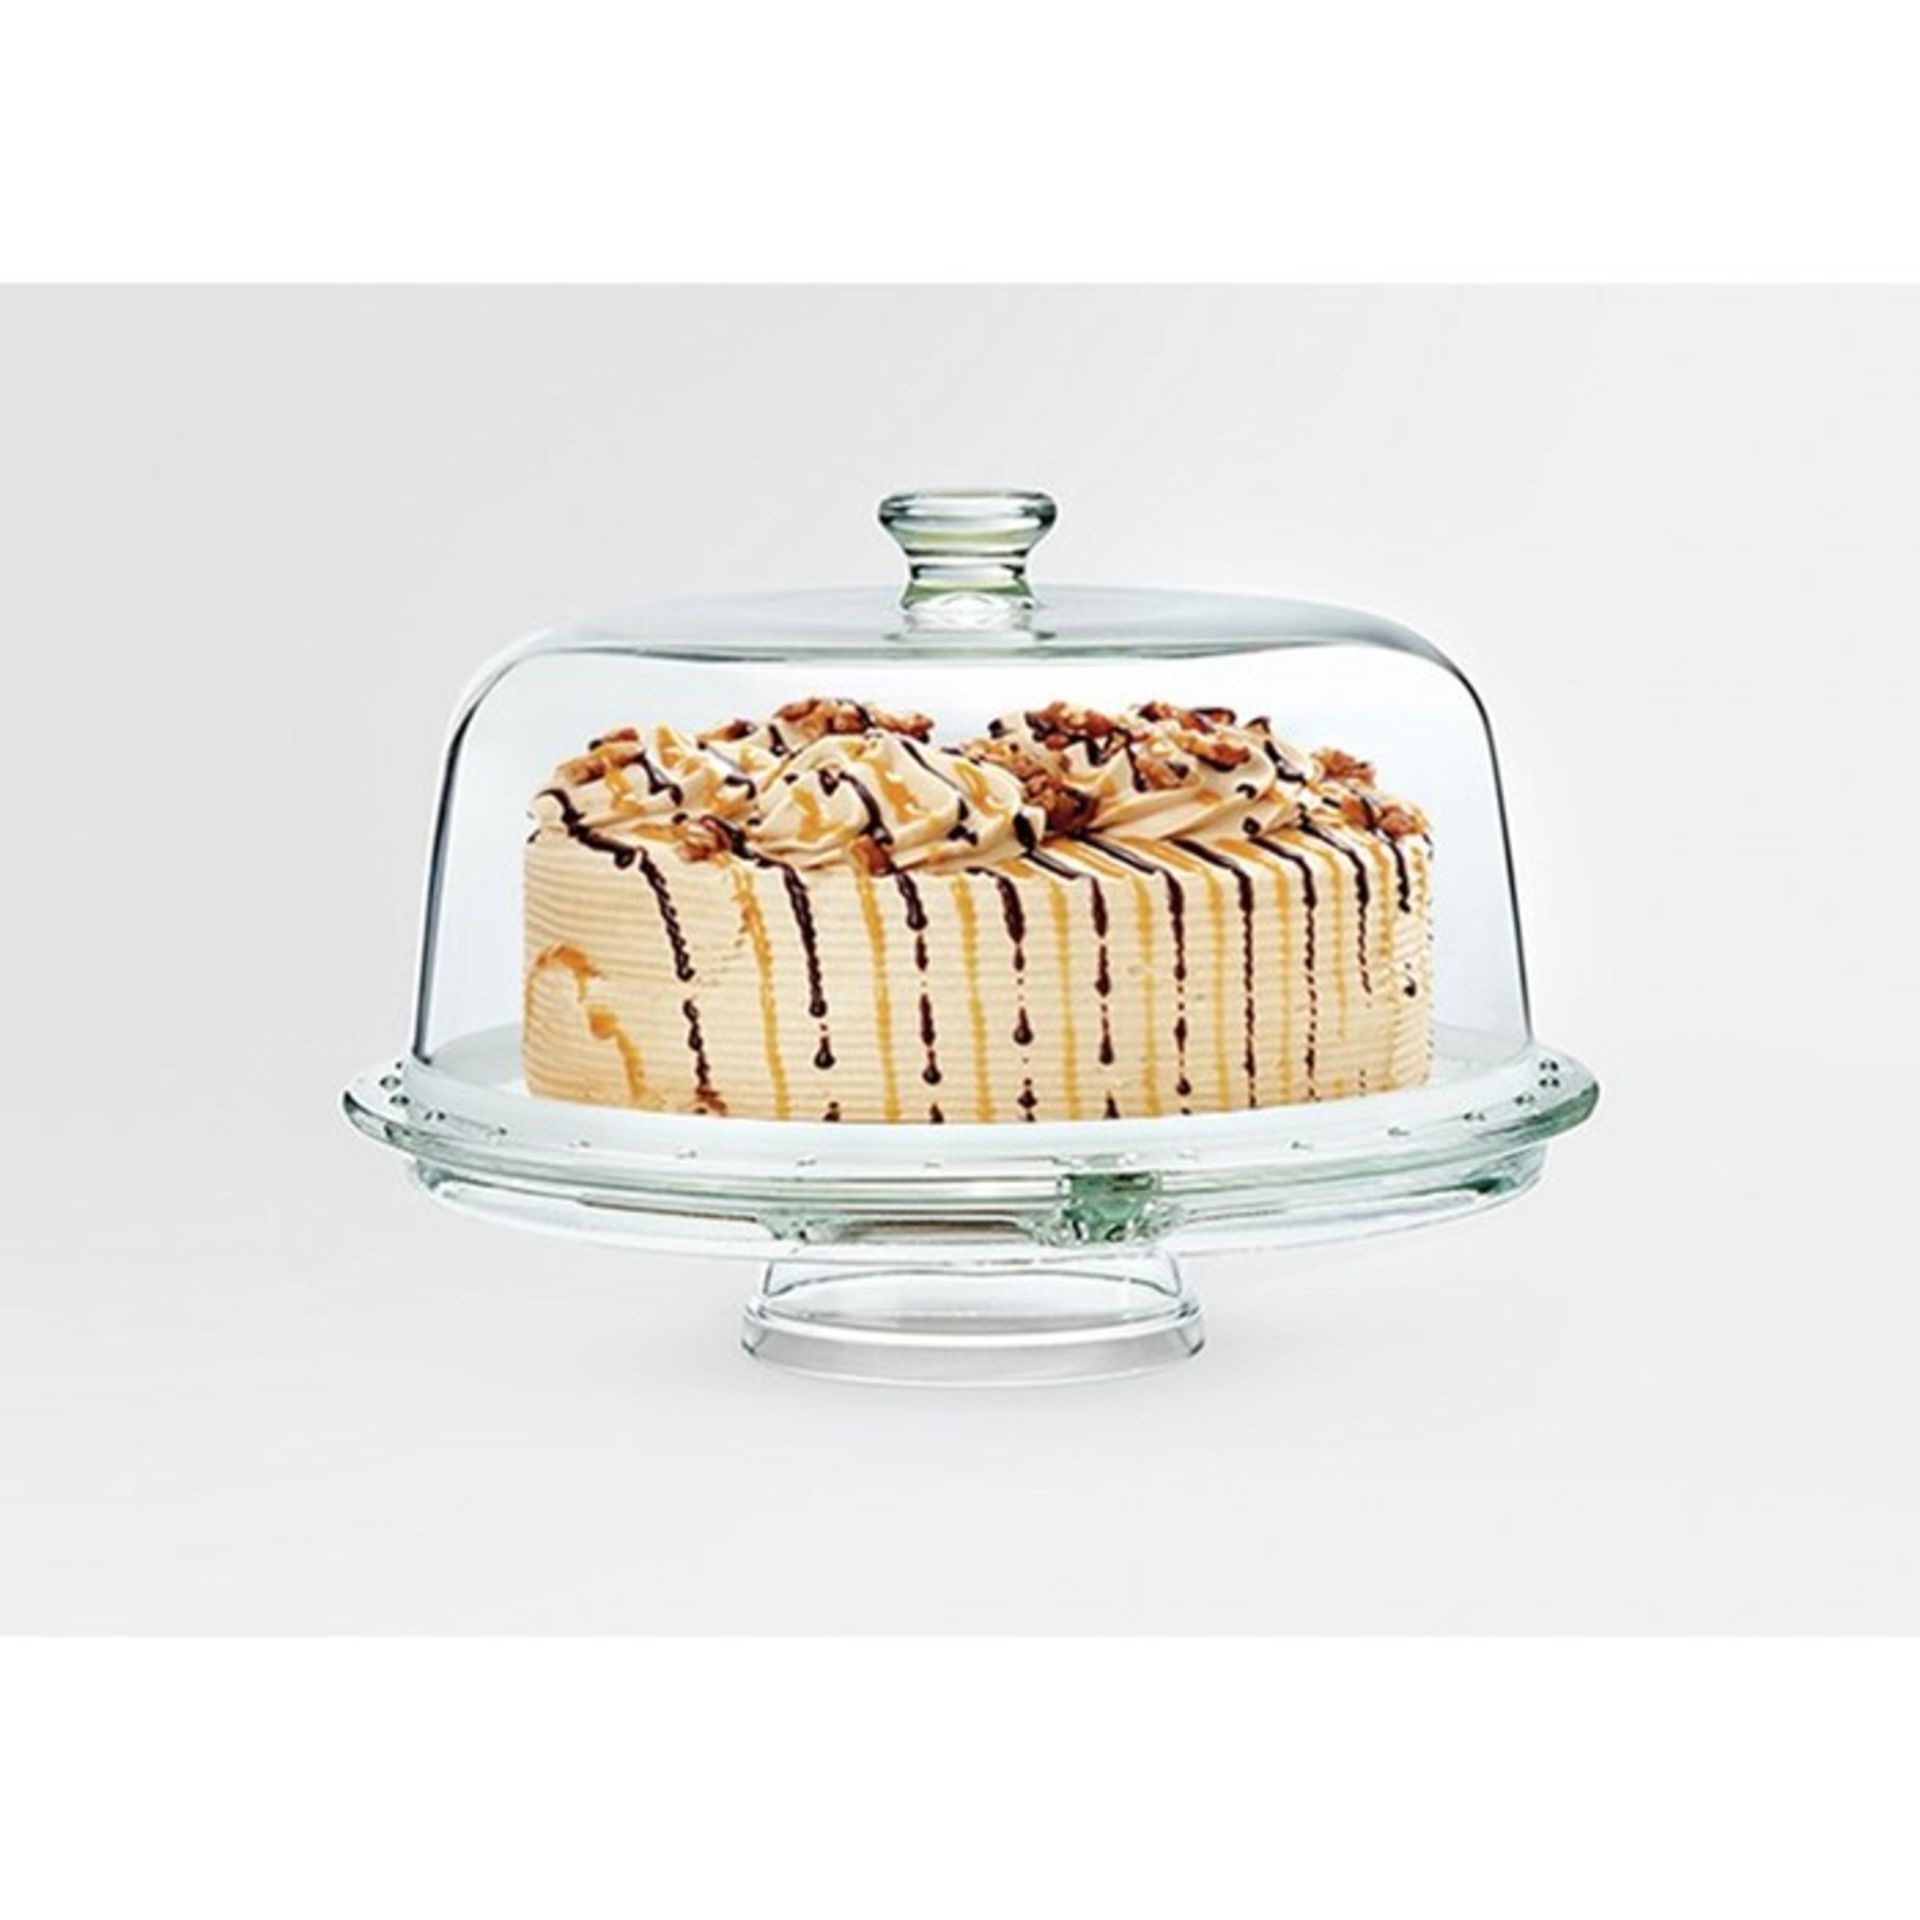 Symple Stuff, Becnel 2 Piece Cake Stand Set - RRP £45.99 (CZY1894 - 21081/39) 2F